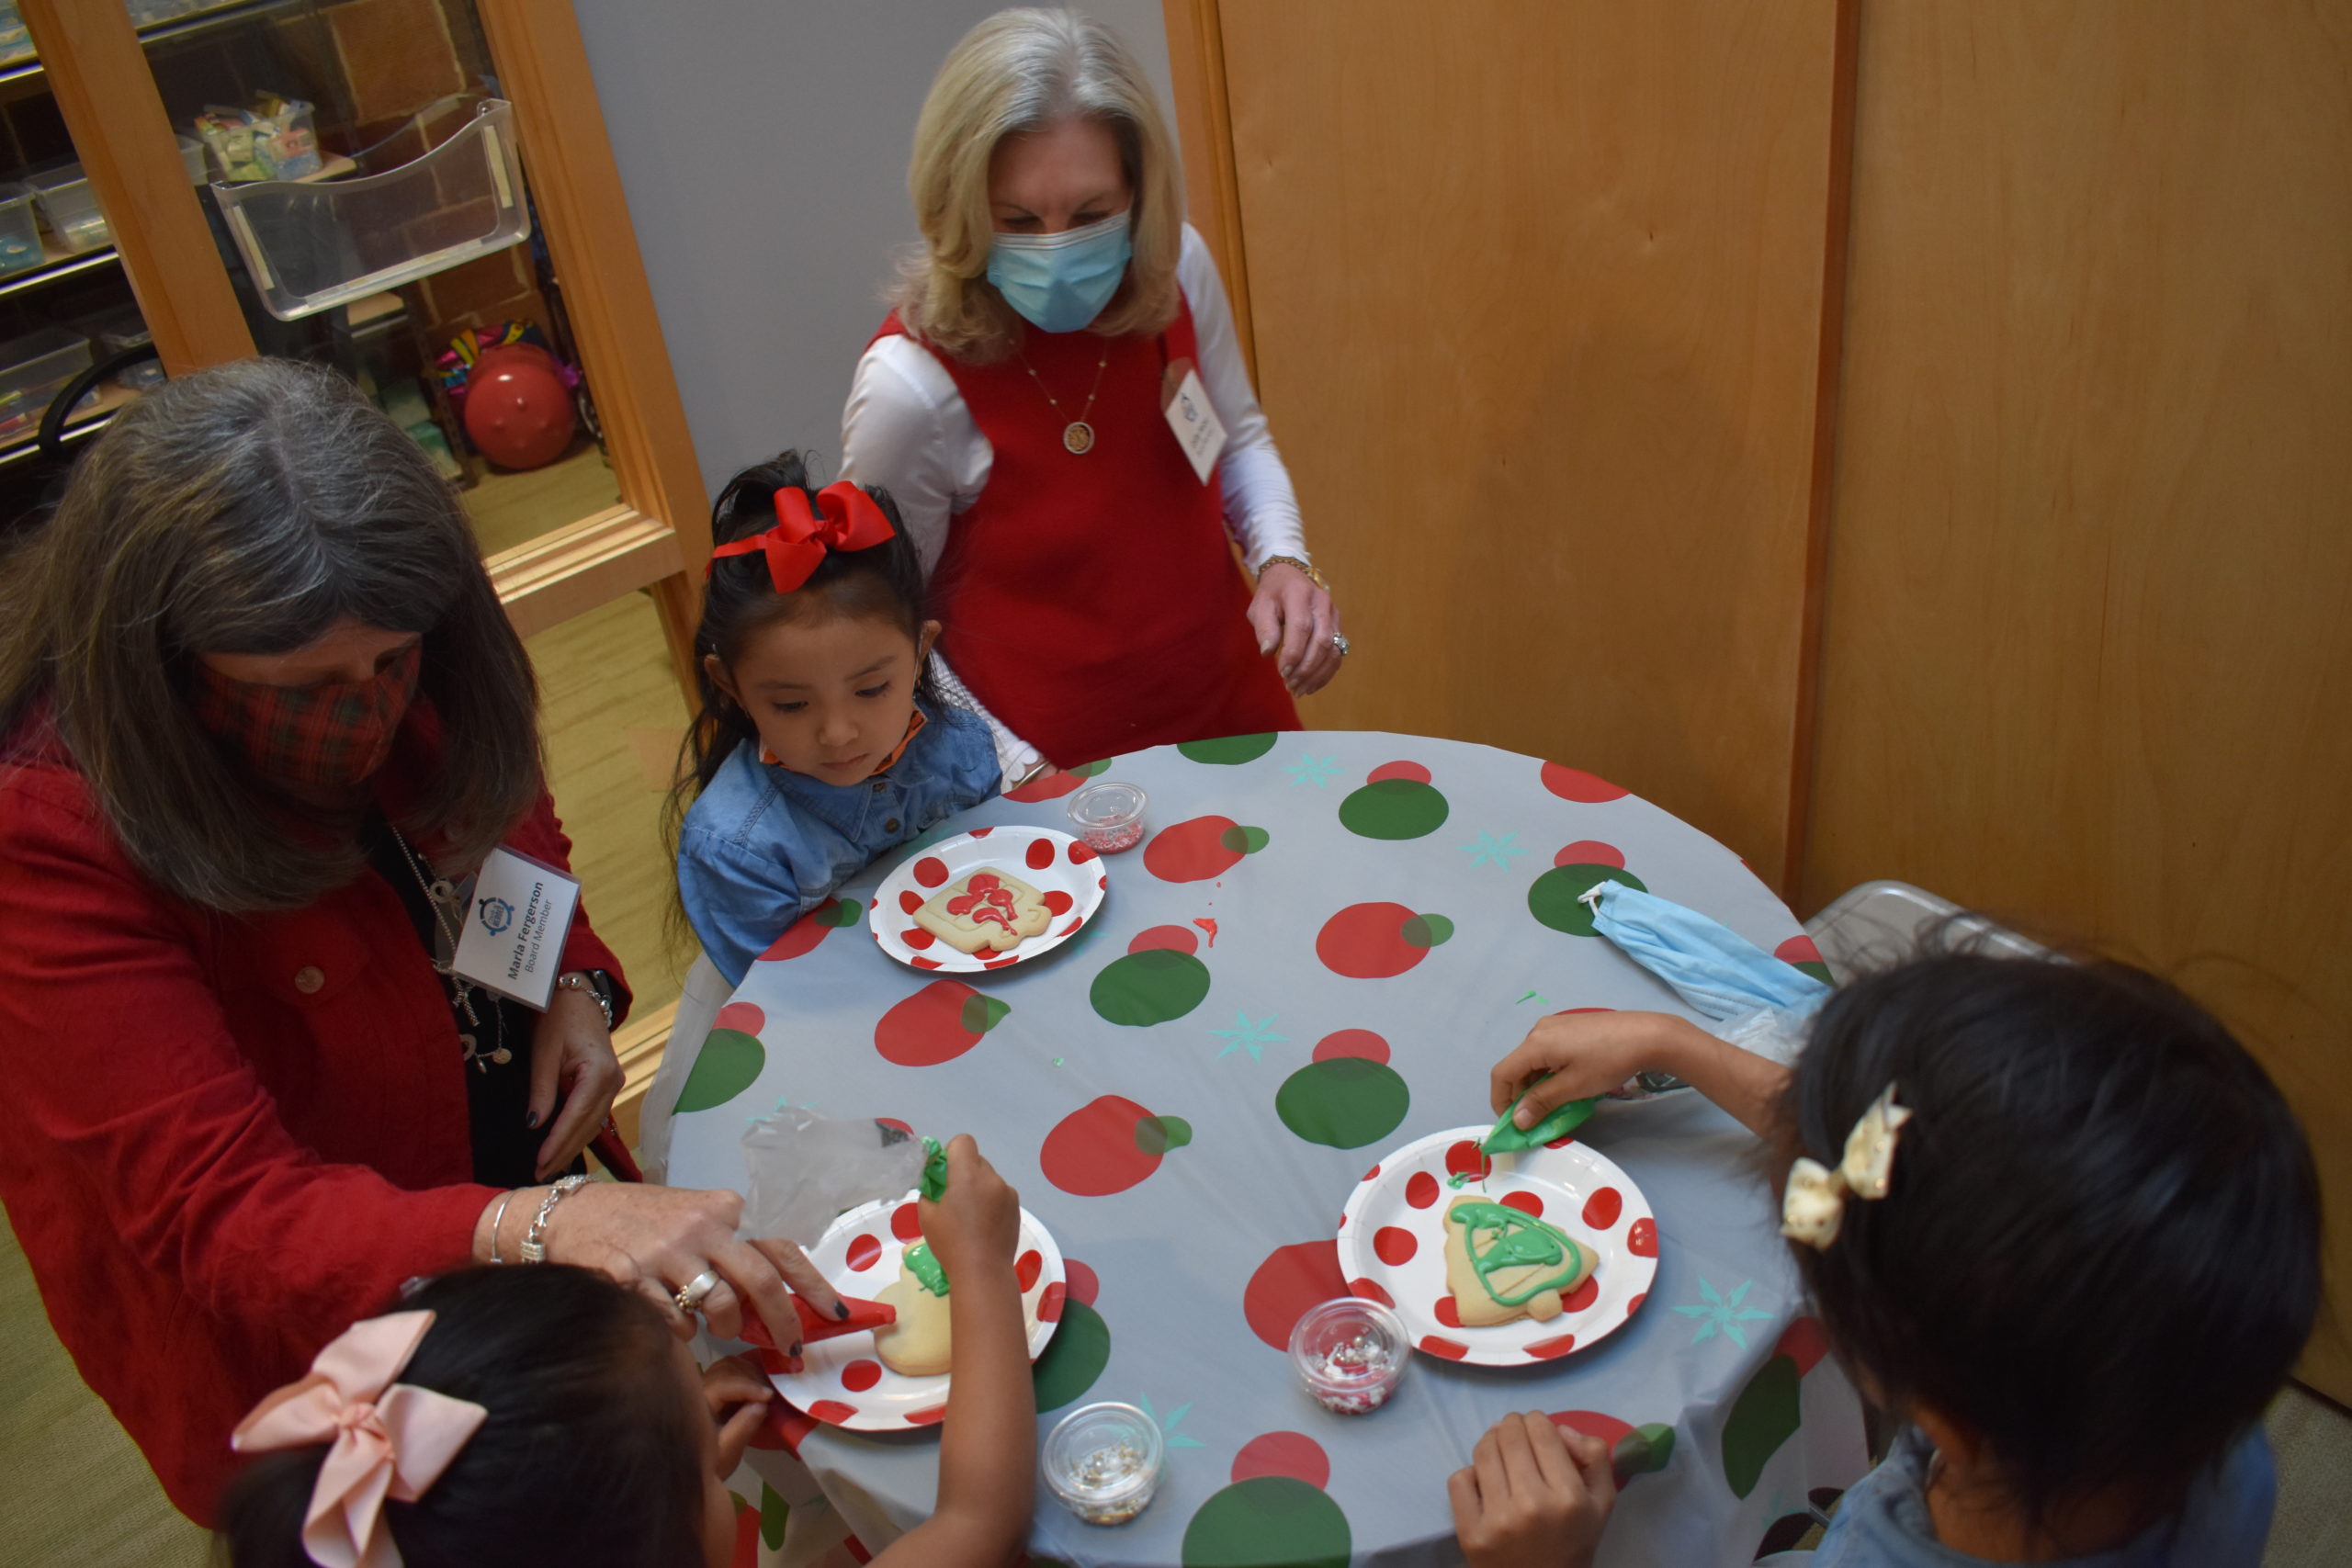 Children are decorating cookies with the help of two adults